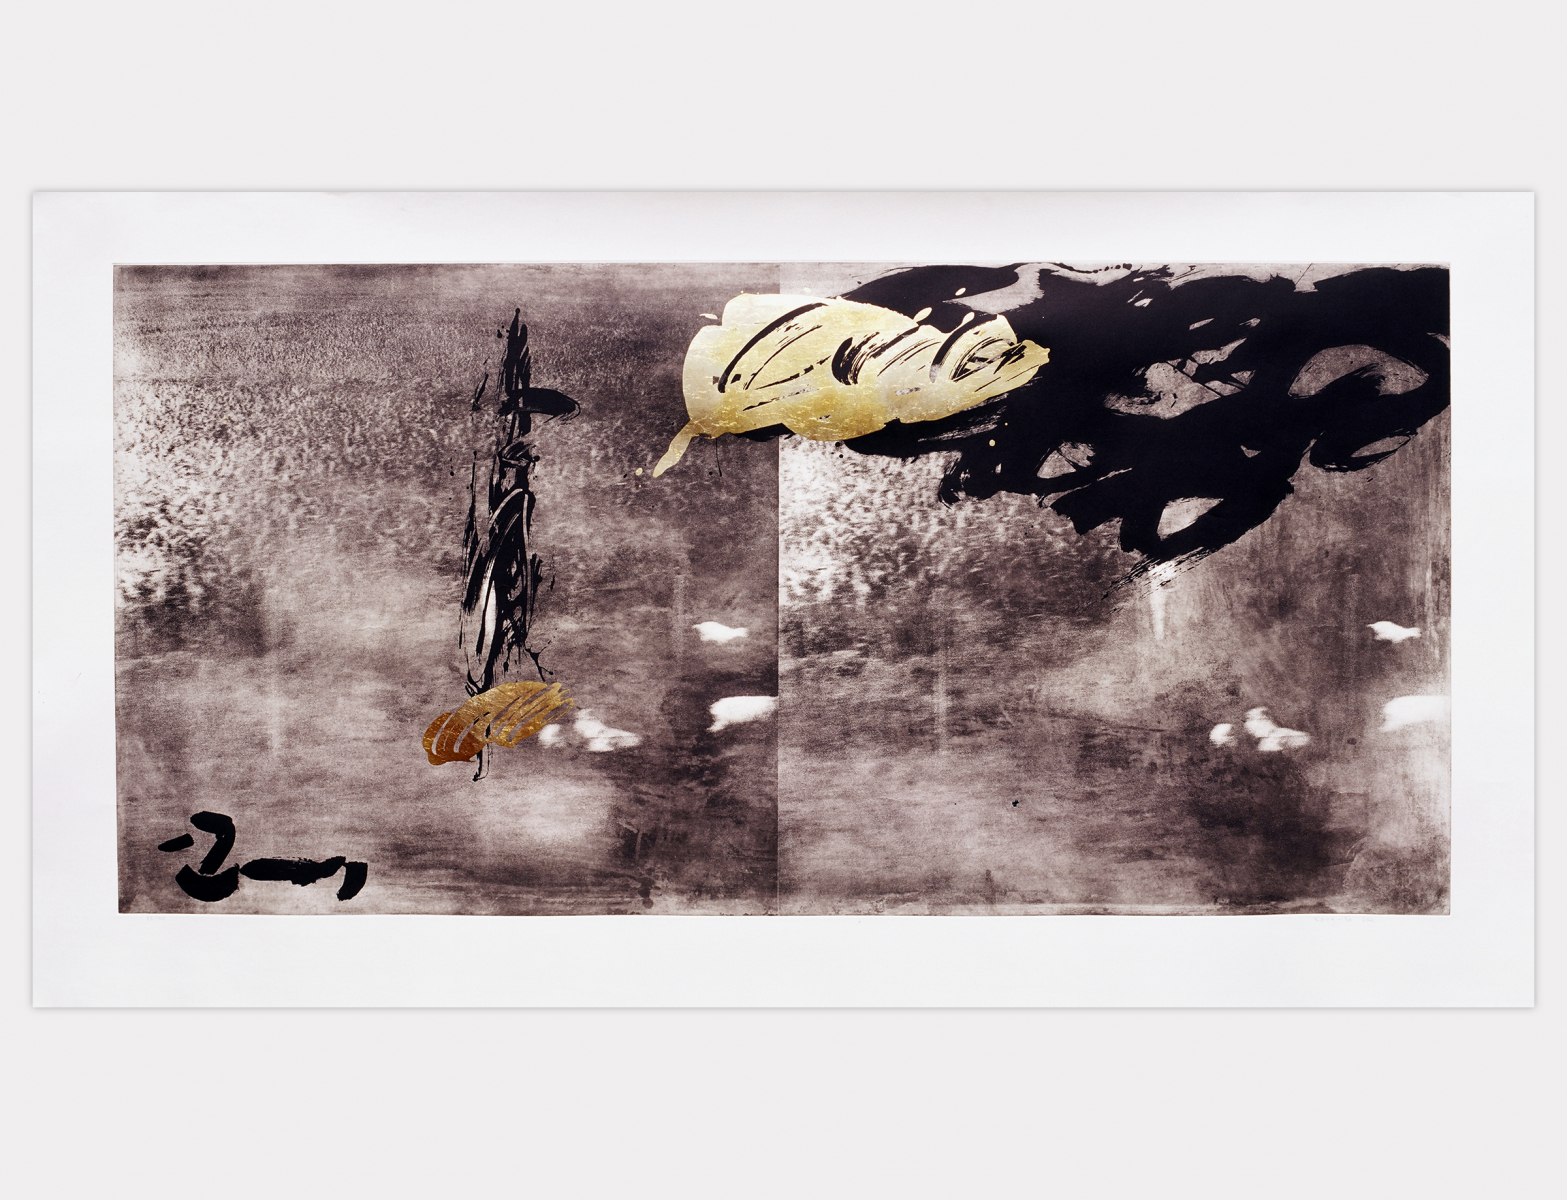 Untitled, 1995. Lithography, 125x225cm